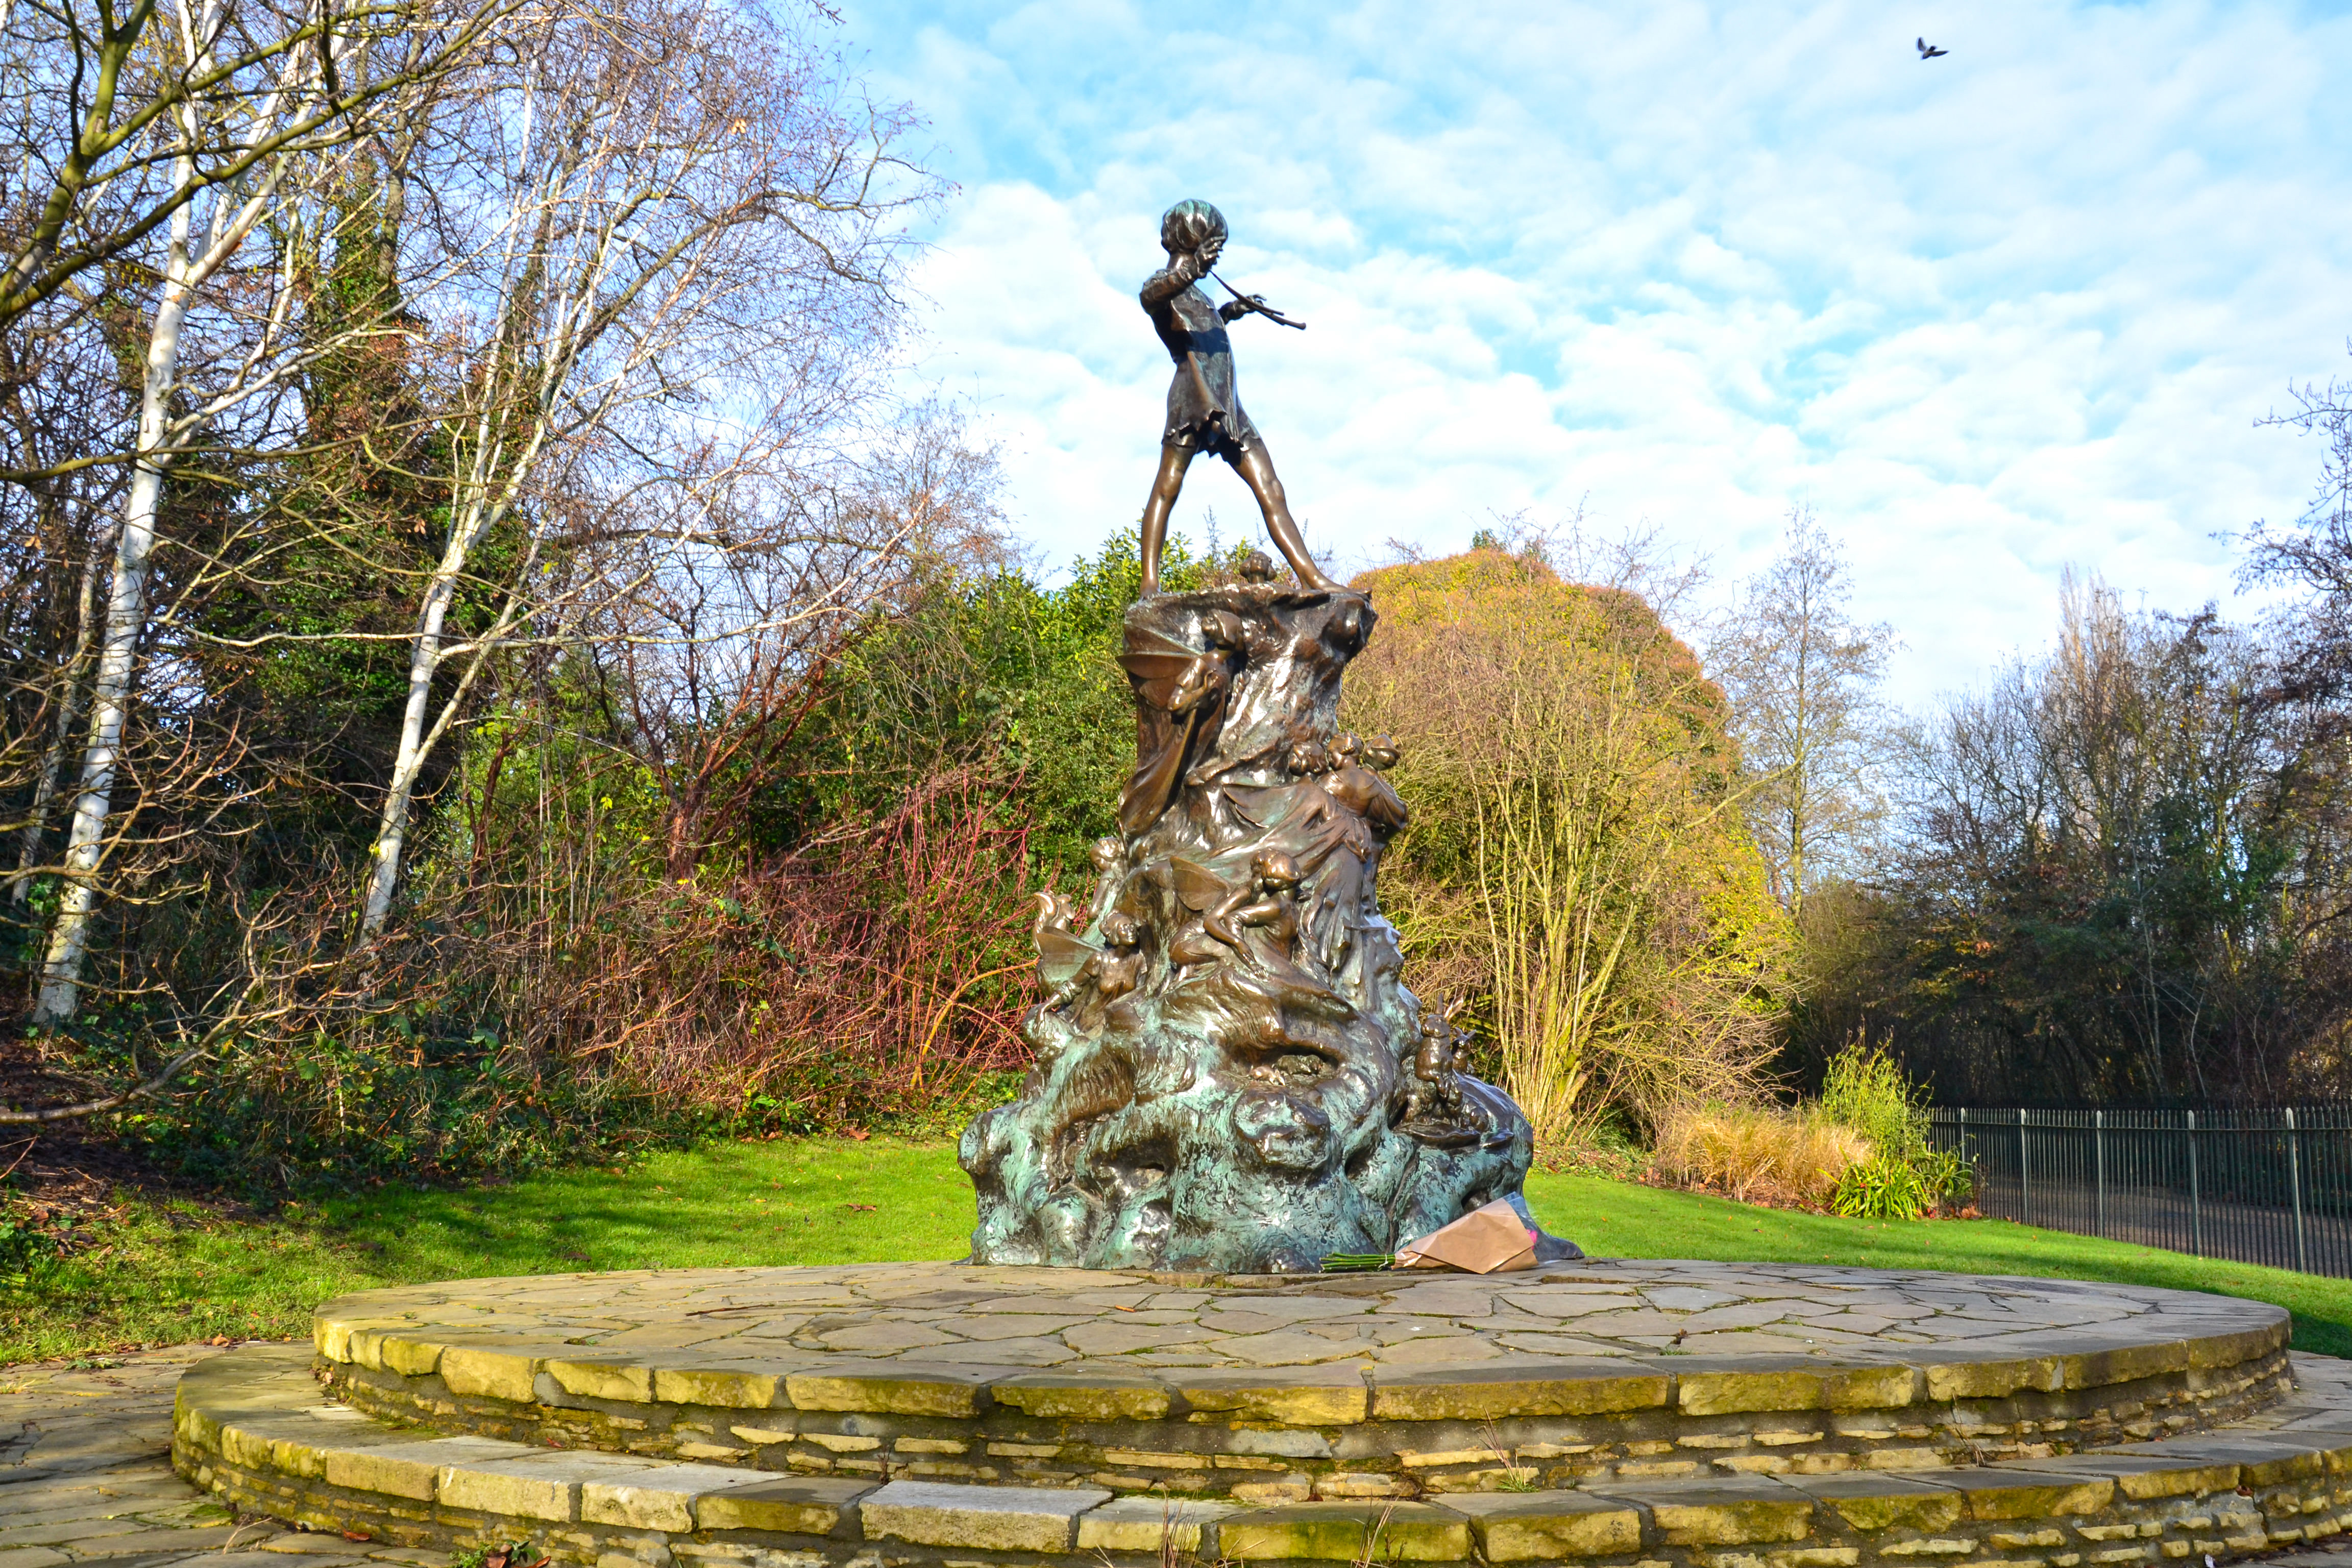 Peter Pan Statue | London, England Attractions - Lonely Planet